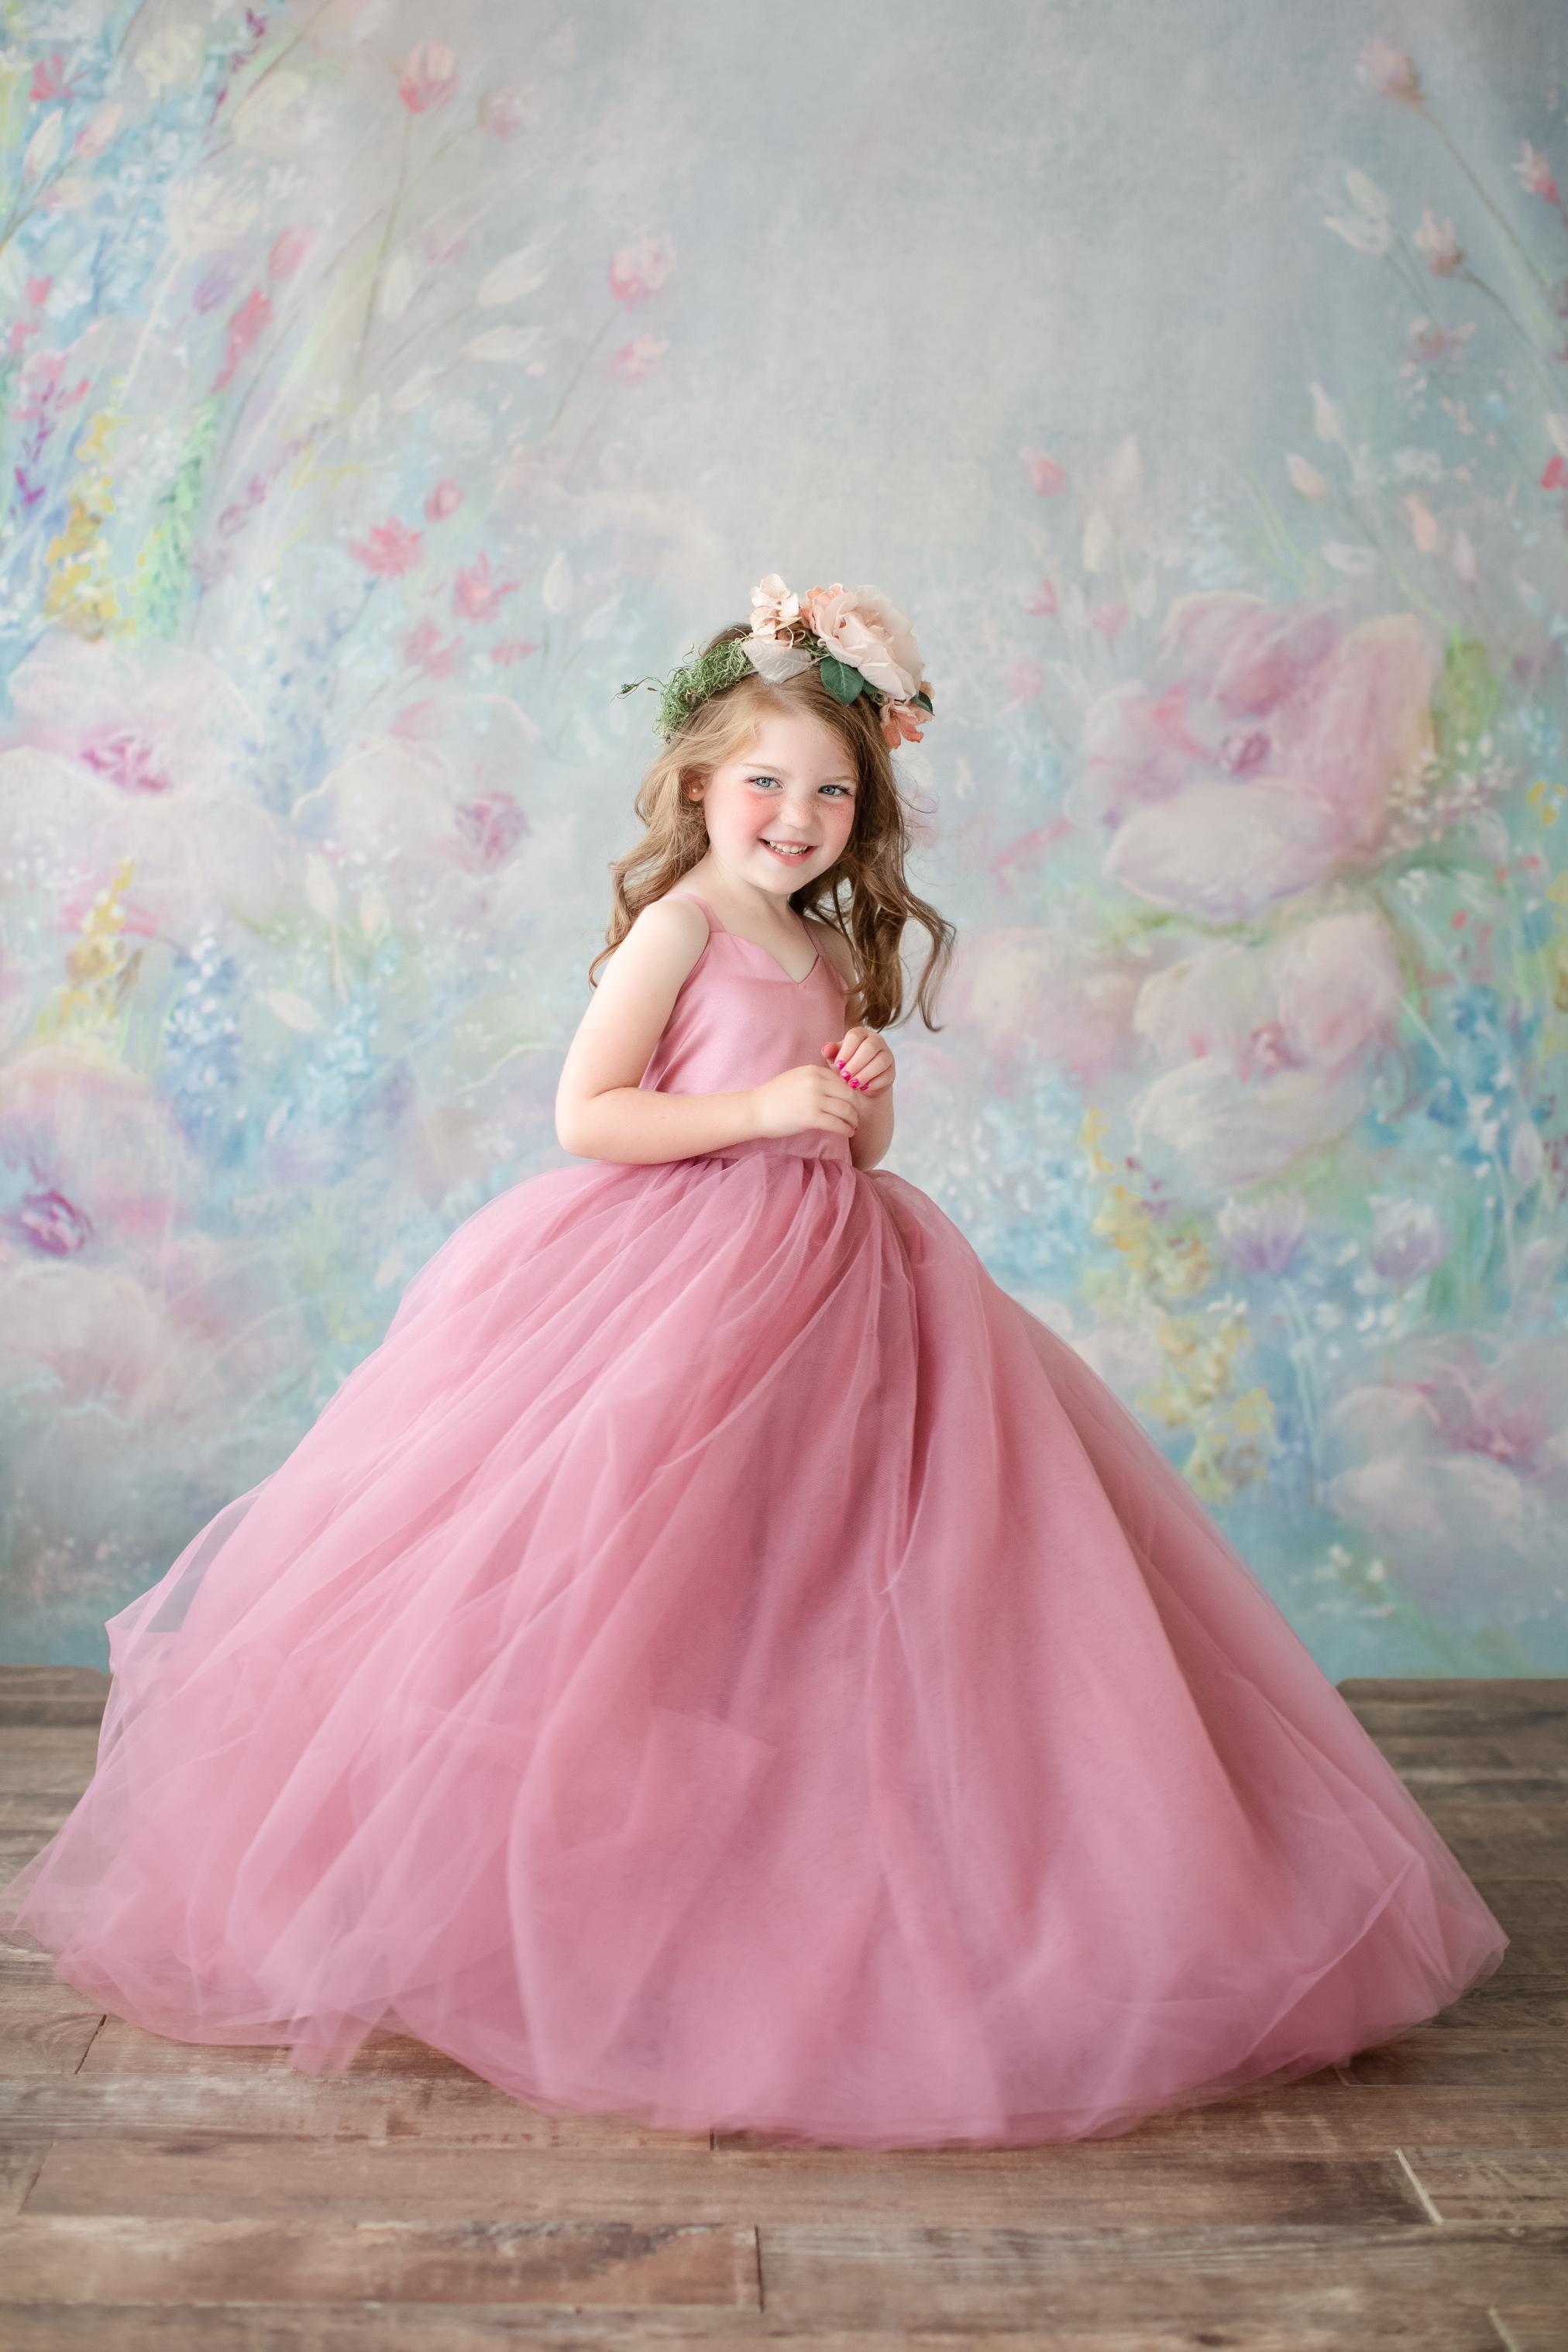 Custom Flower Girl Gowns - Made to measure